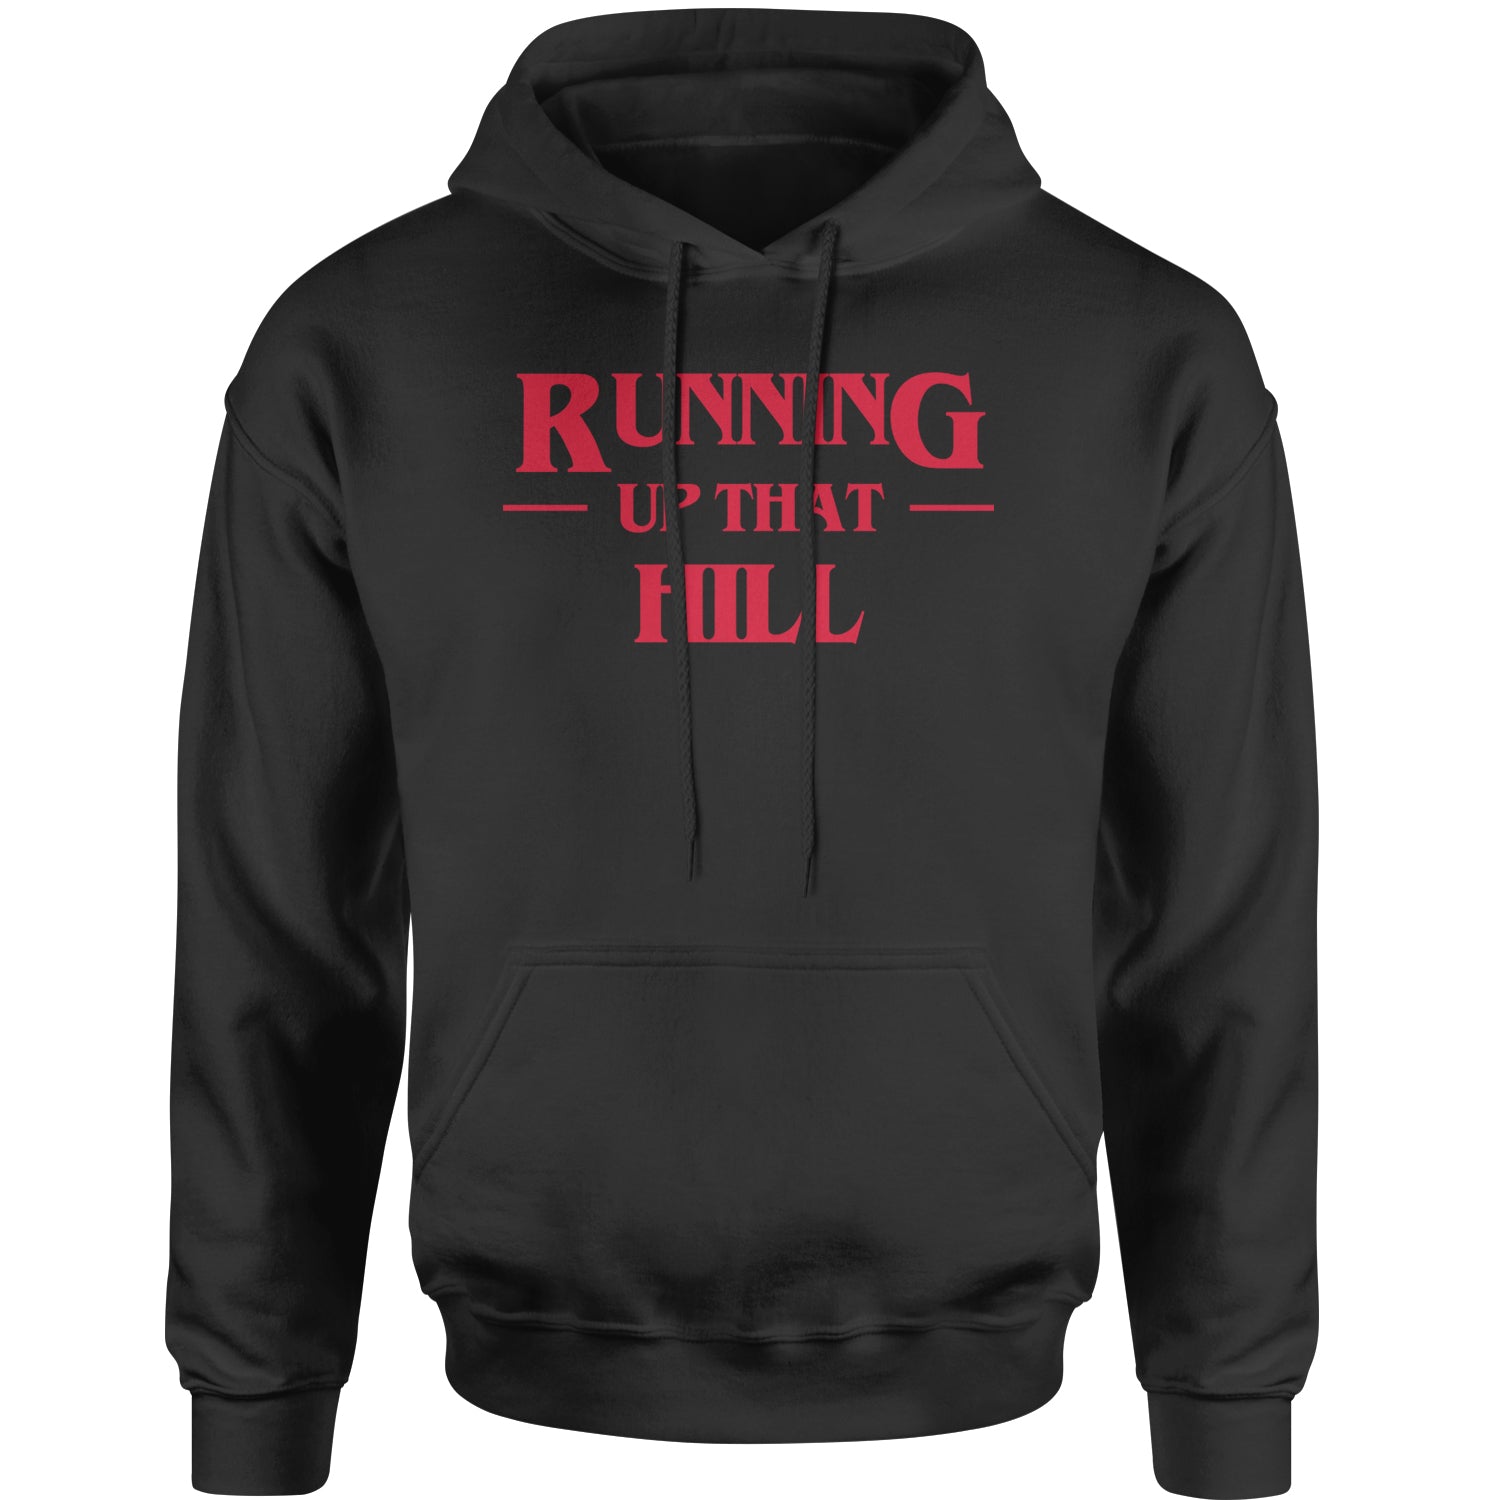 Running Up That Hill Adult Hoodie Sweatshirt 4, don’t, eleven, four, friends, lie, season by Expression Tees